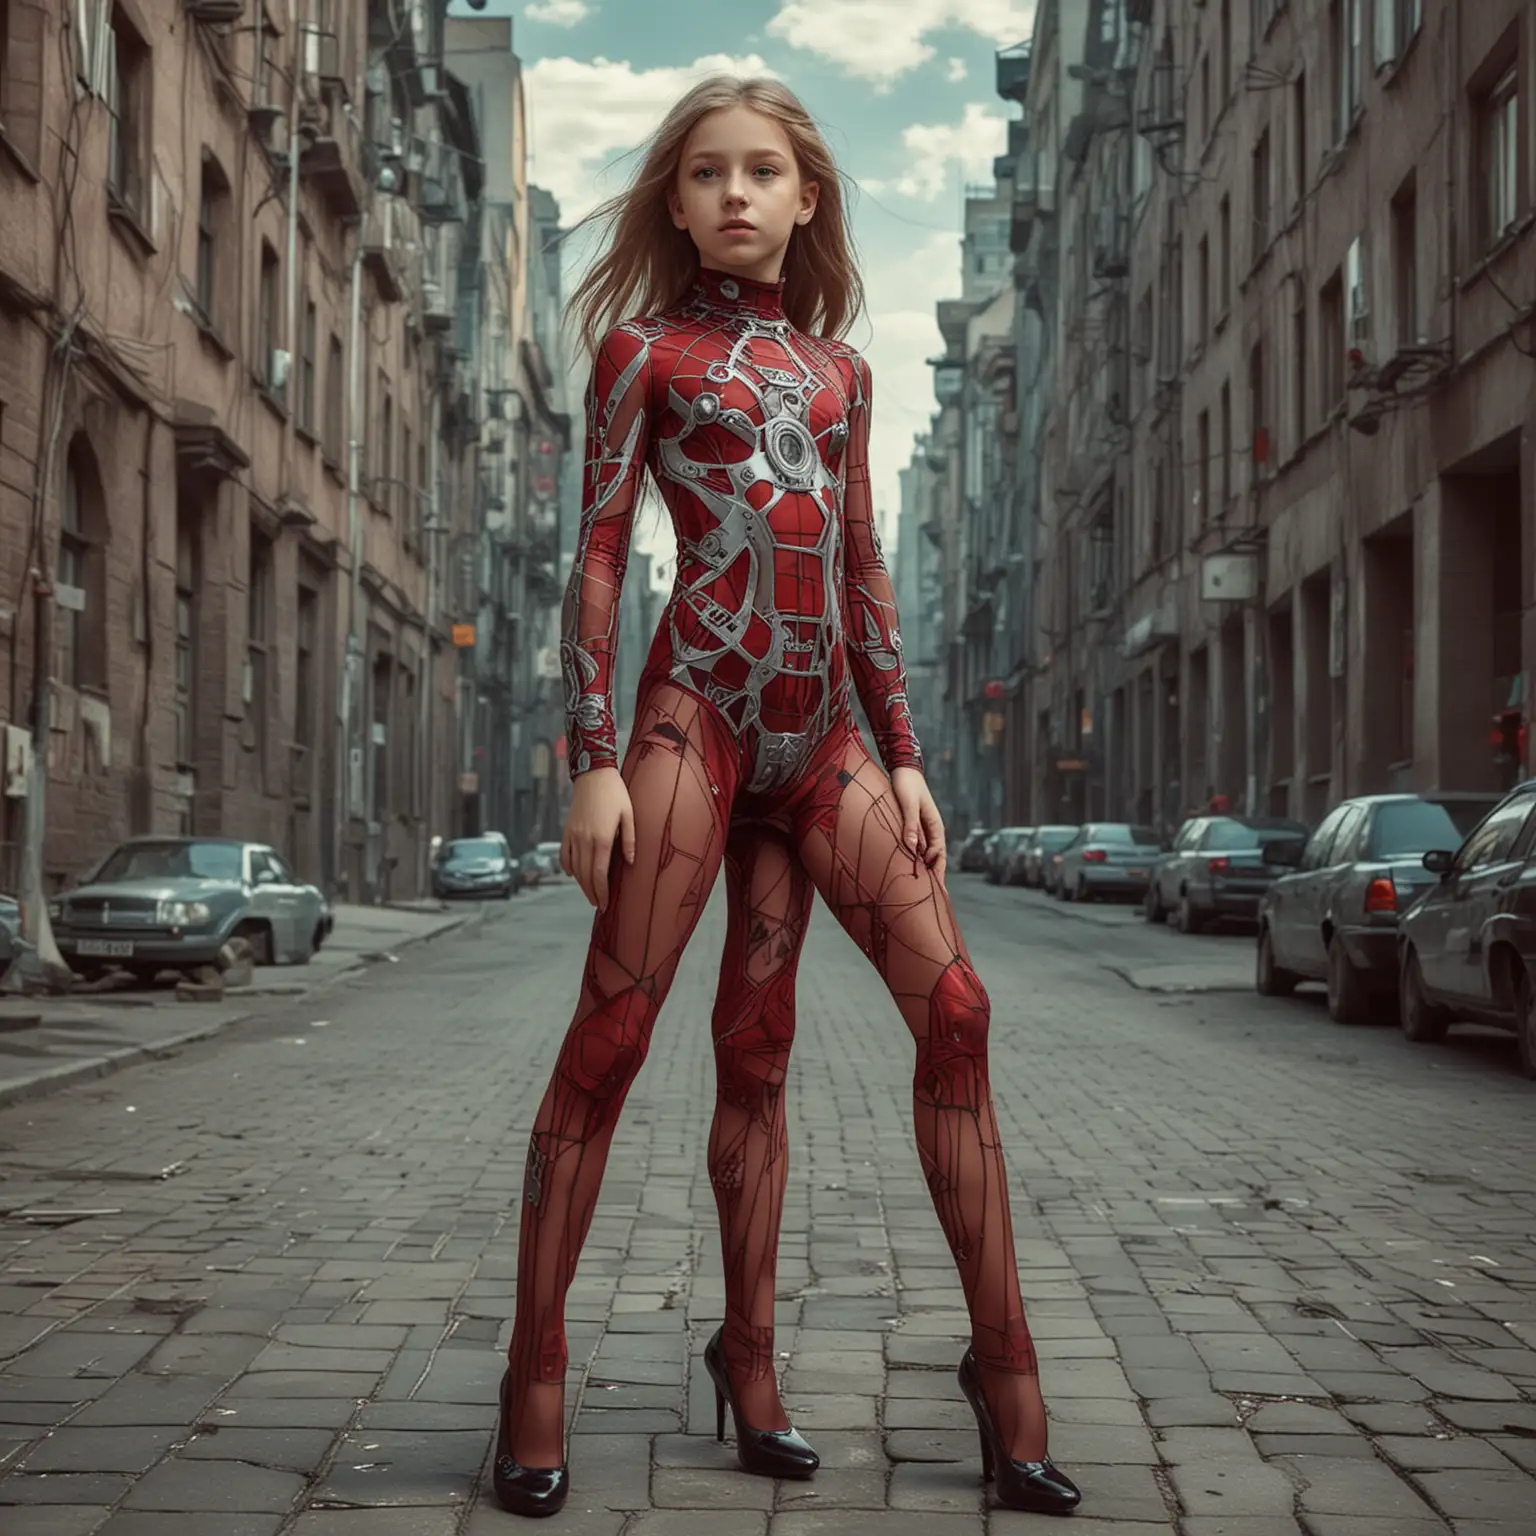 Girl-in-10-Years-Soviet-Union-Inspired-Full-Height-Luxurious-Bodystocking-in-Futuristic-City